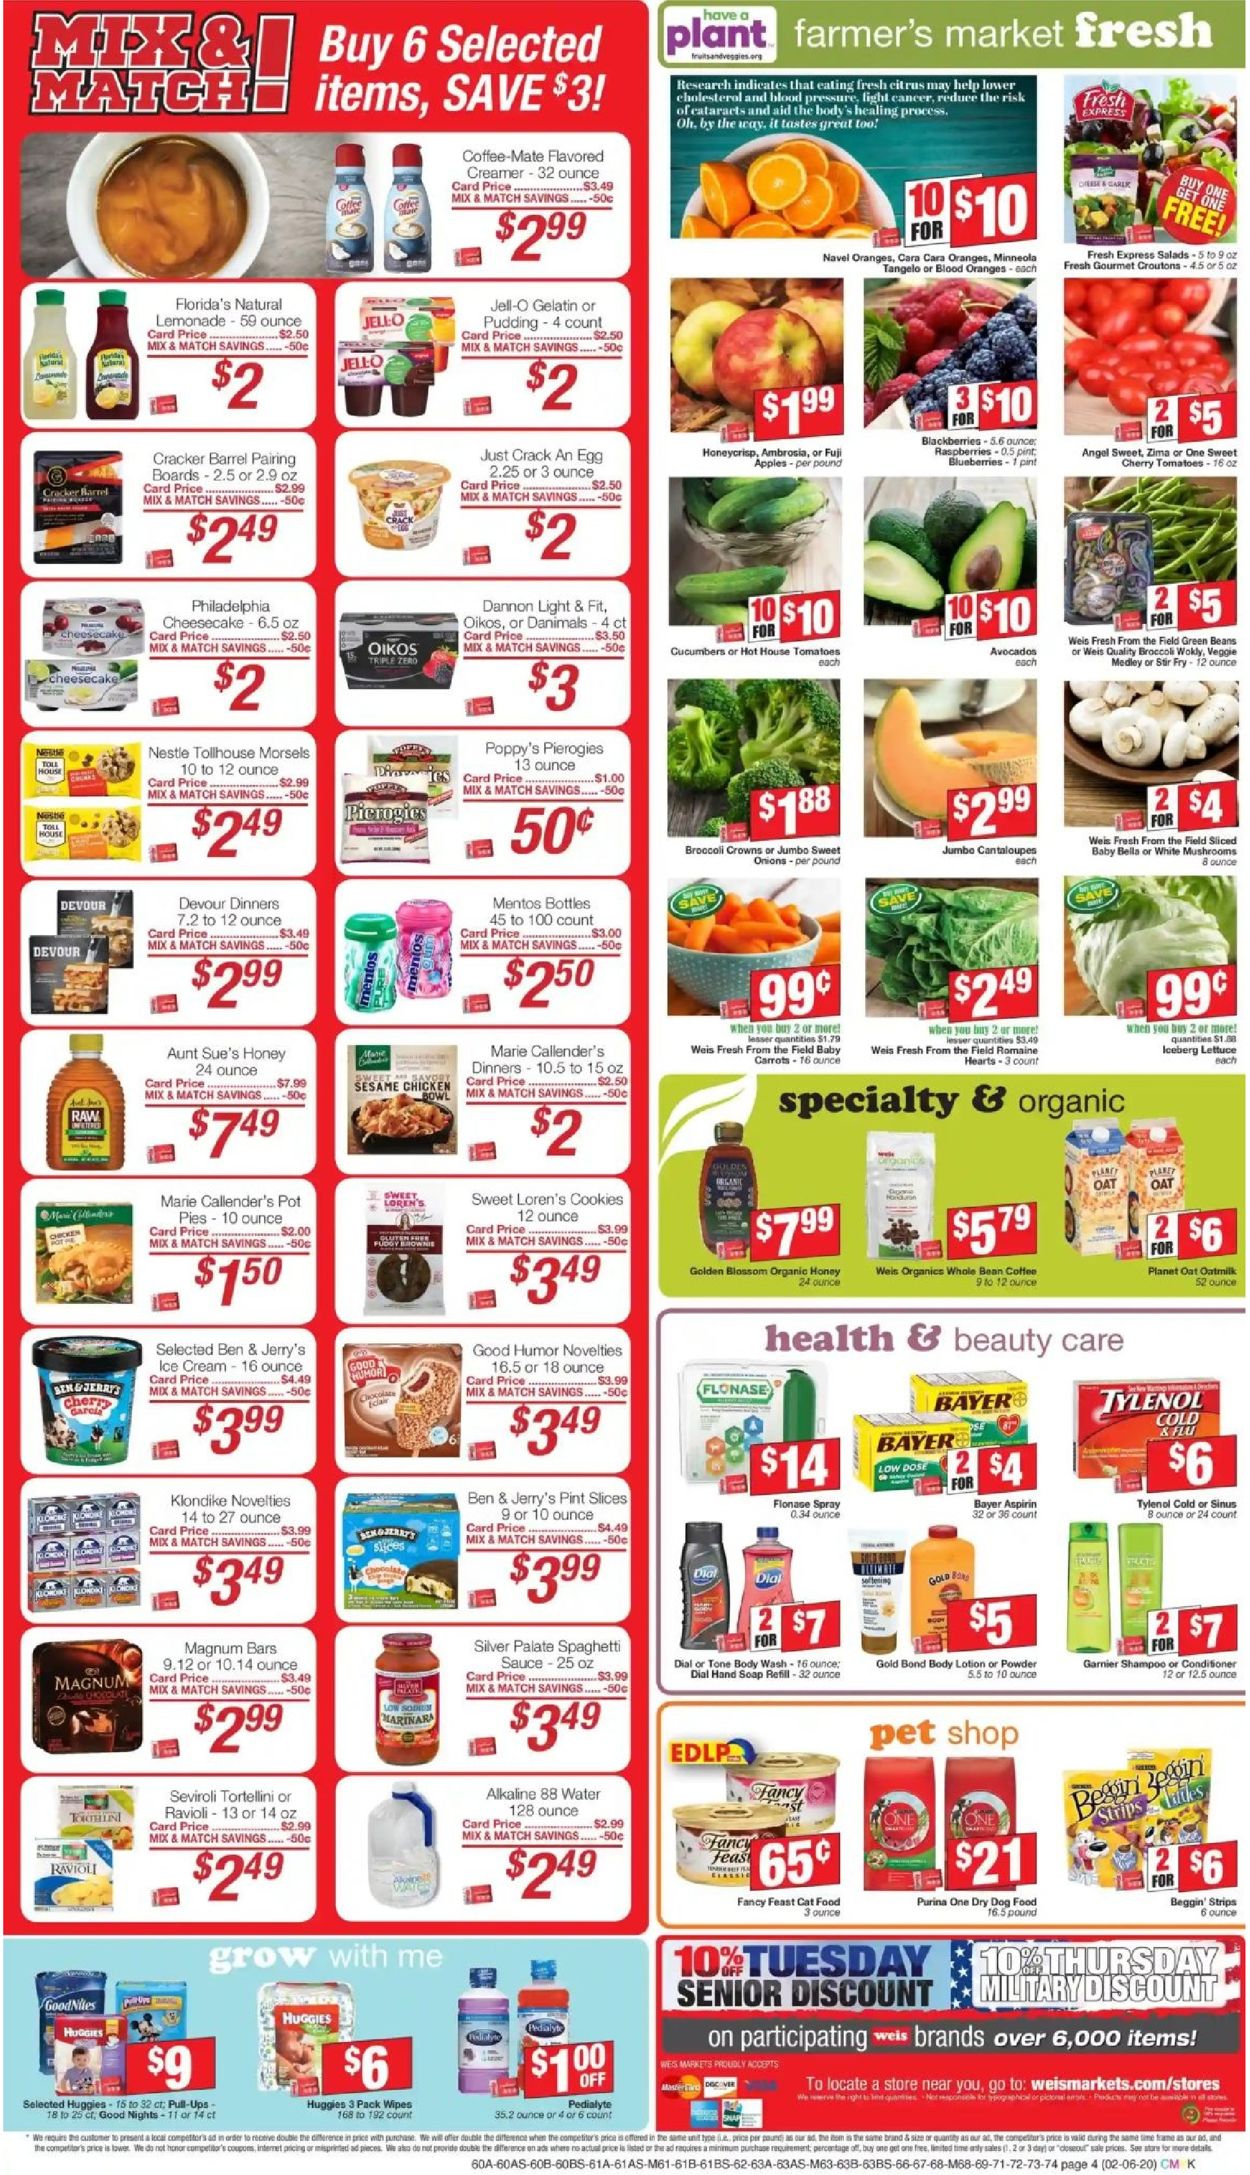 Catalogue Weis from 02/06/2020